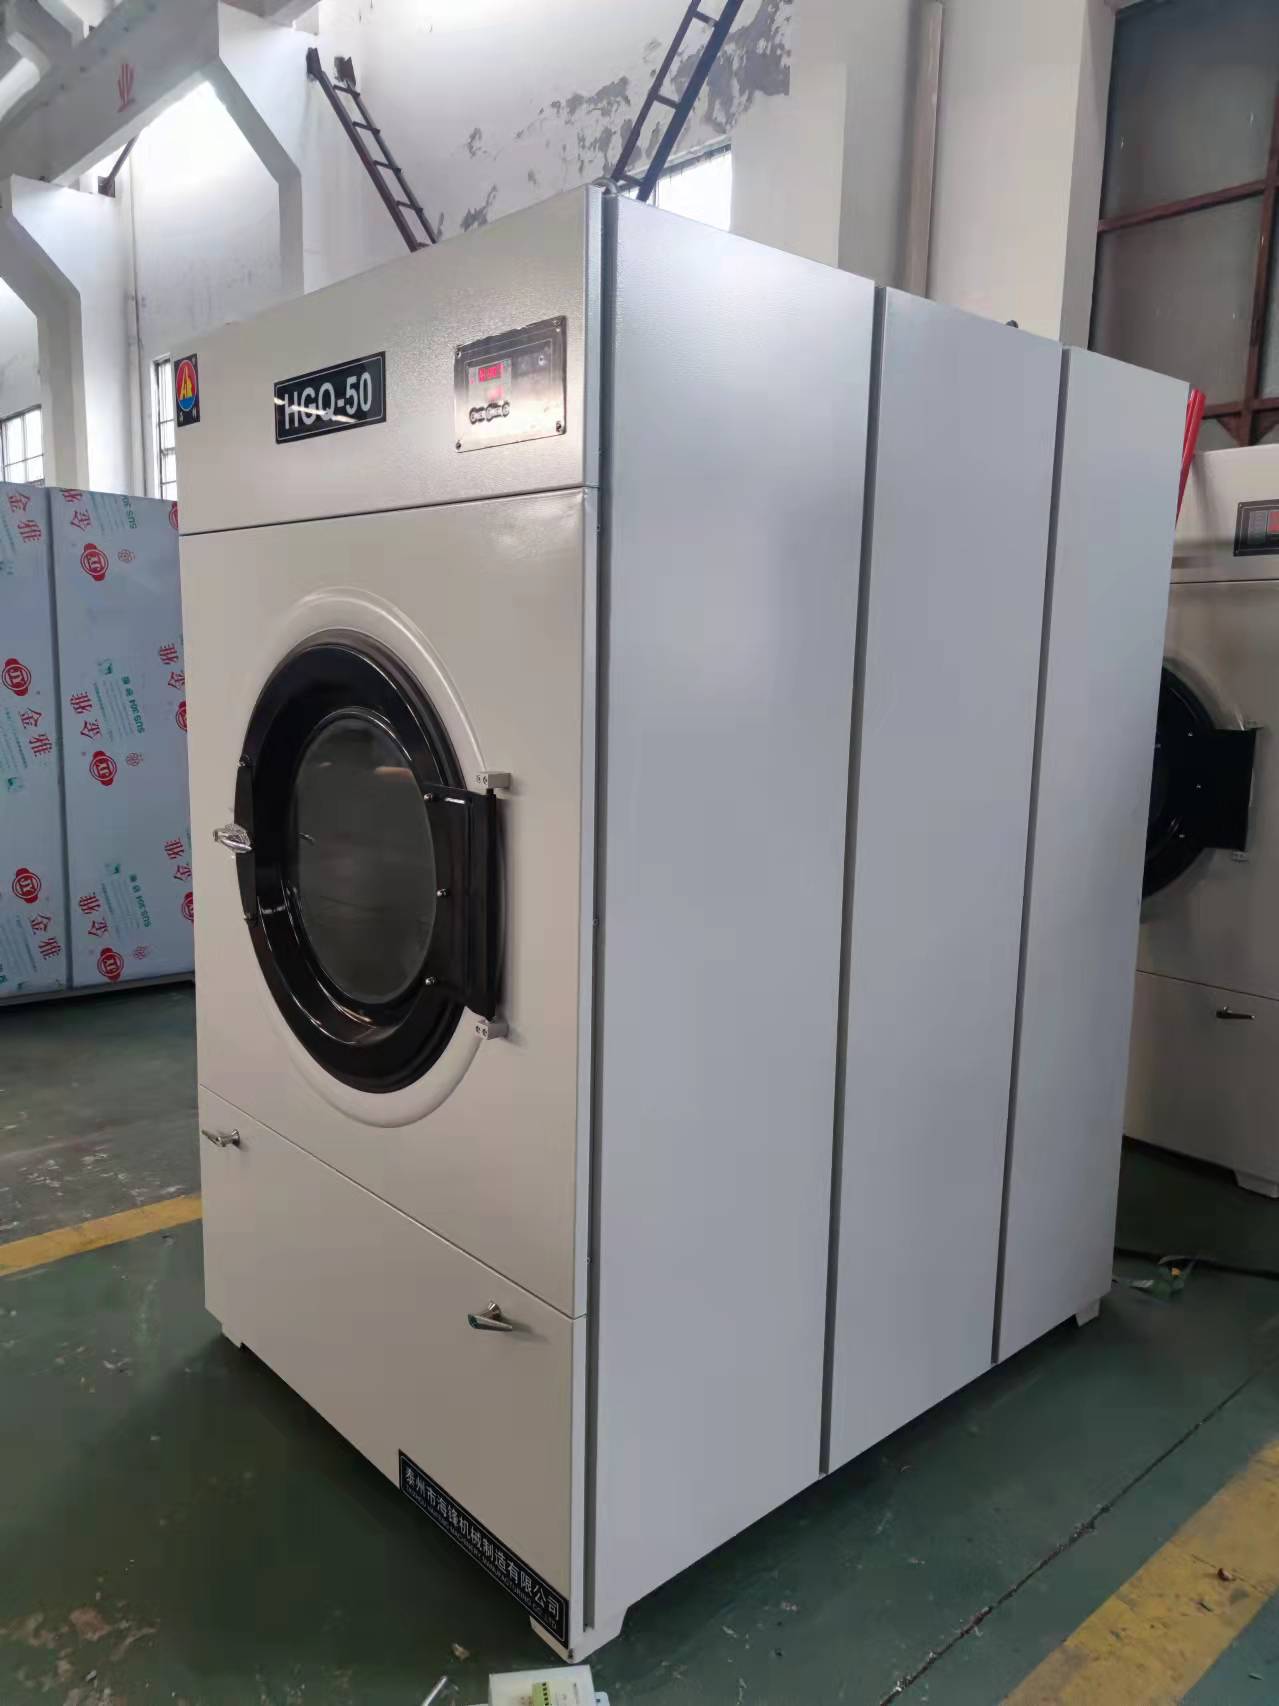 Brand Industrial Laundry Washing Machine Washer Dryer for Hotel